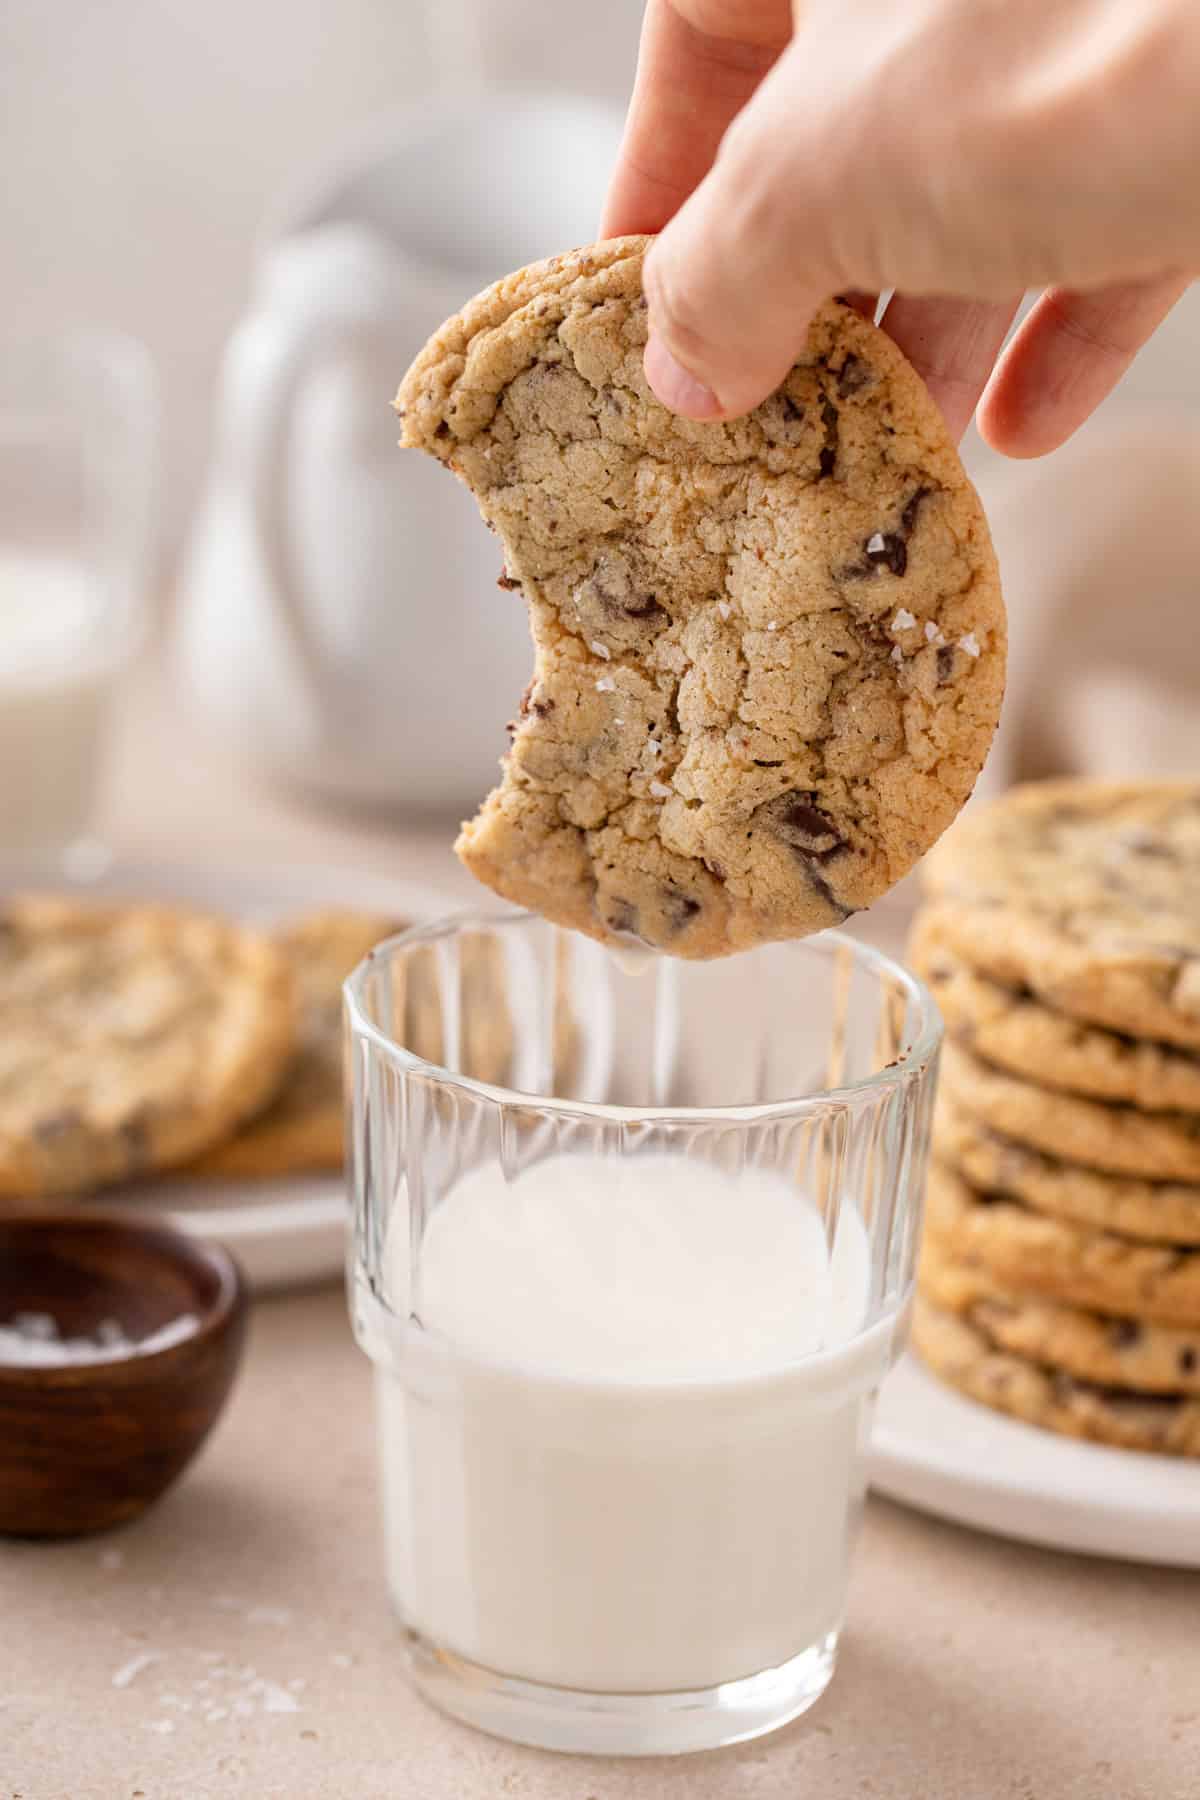 Hand about to dunk an easy chocolate chip cookie with a bite taken out of it into a glass of milk.